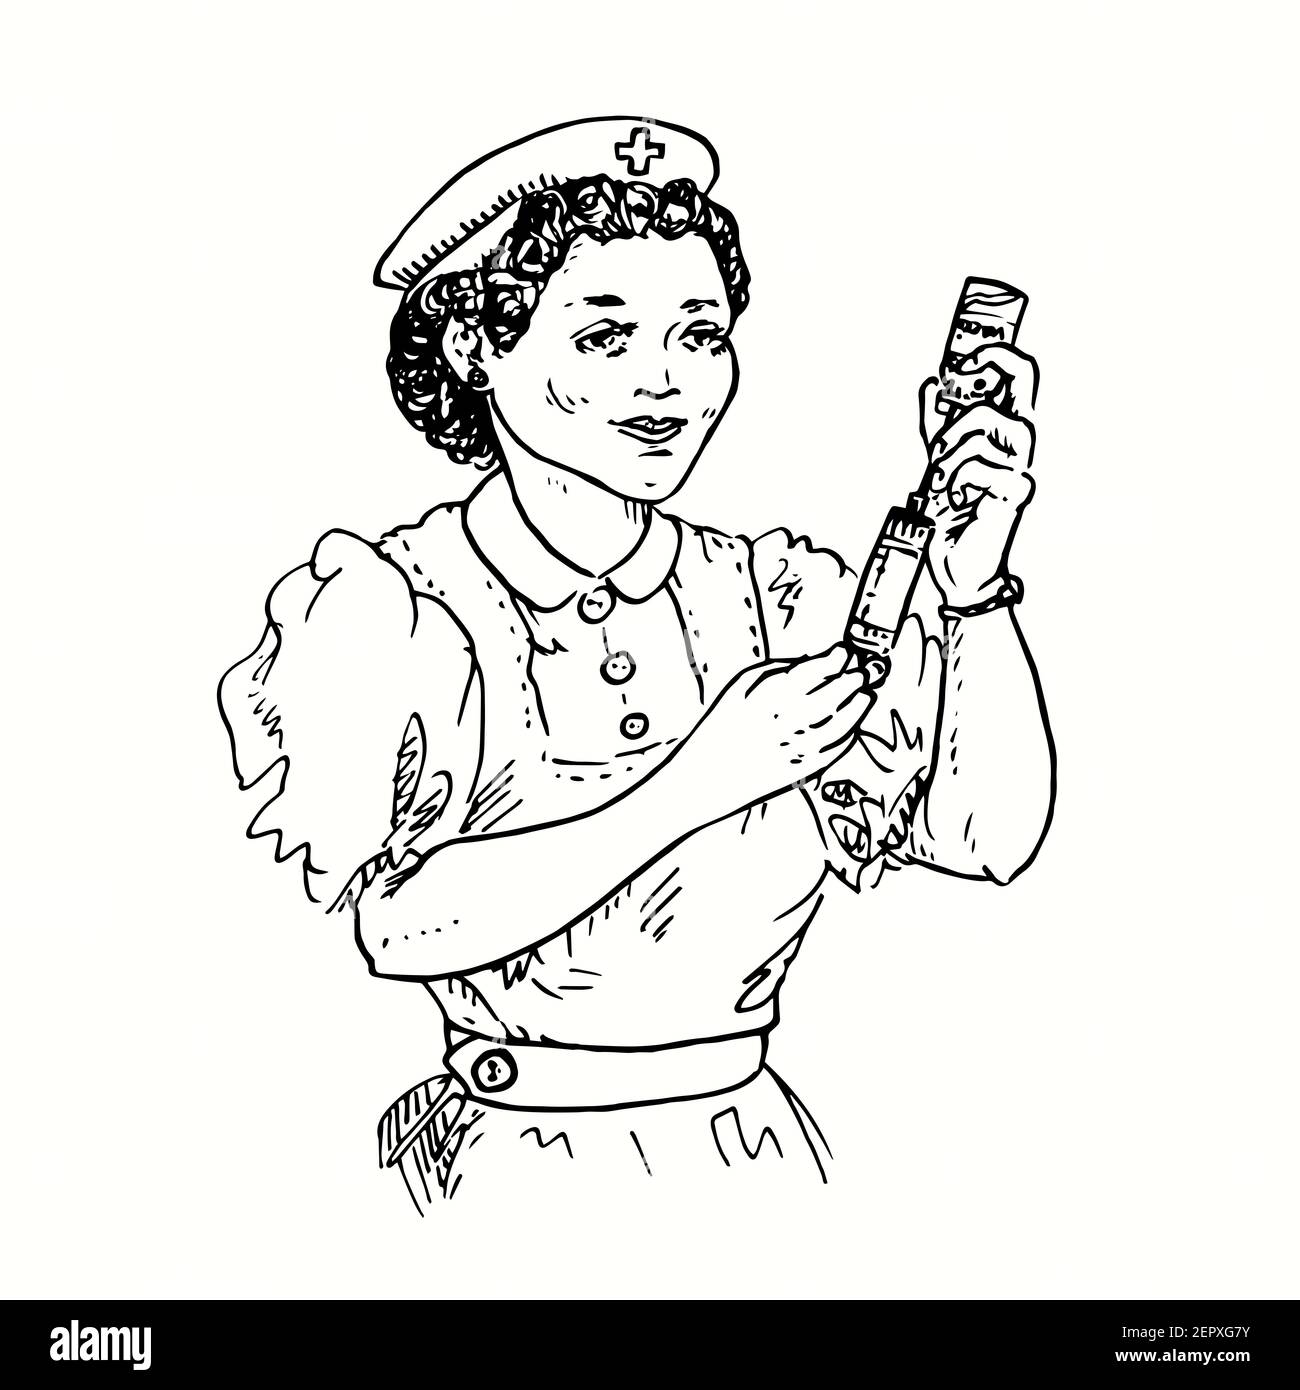 Nurse getting ready to inject, getting vaccine from bottle (vial). Ink black and white drawing. Stock Photo